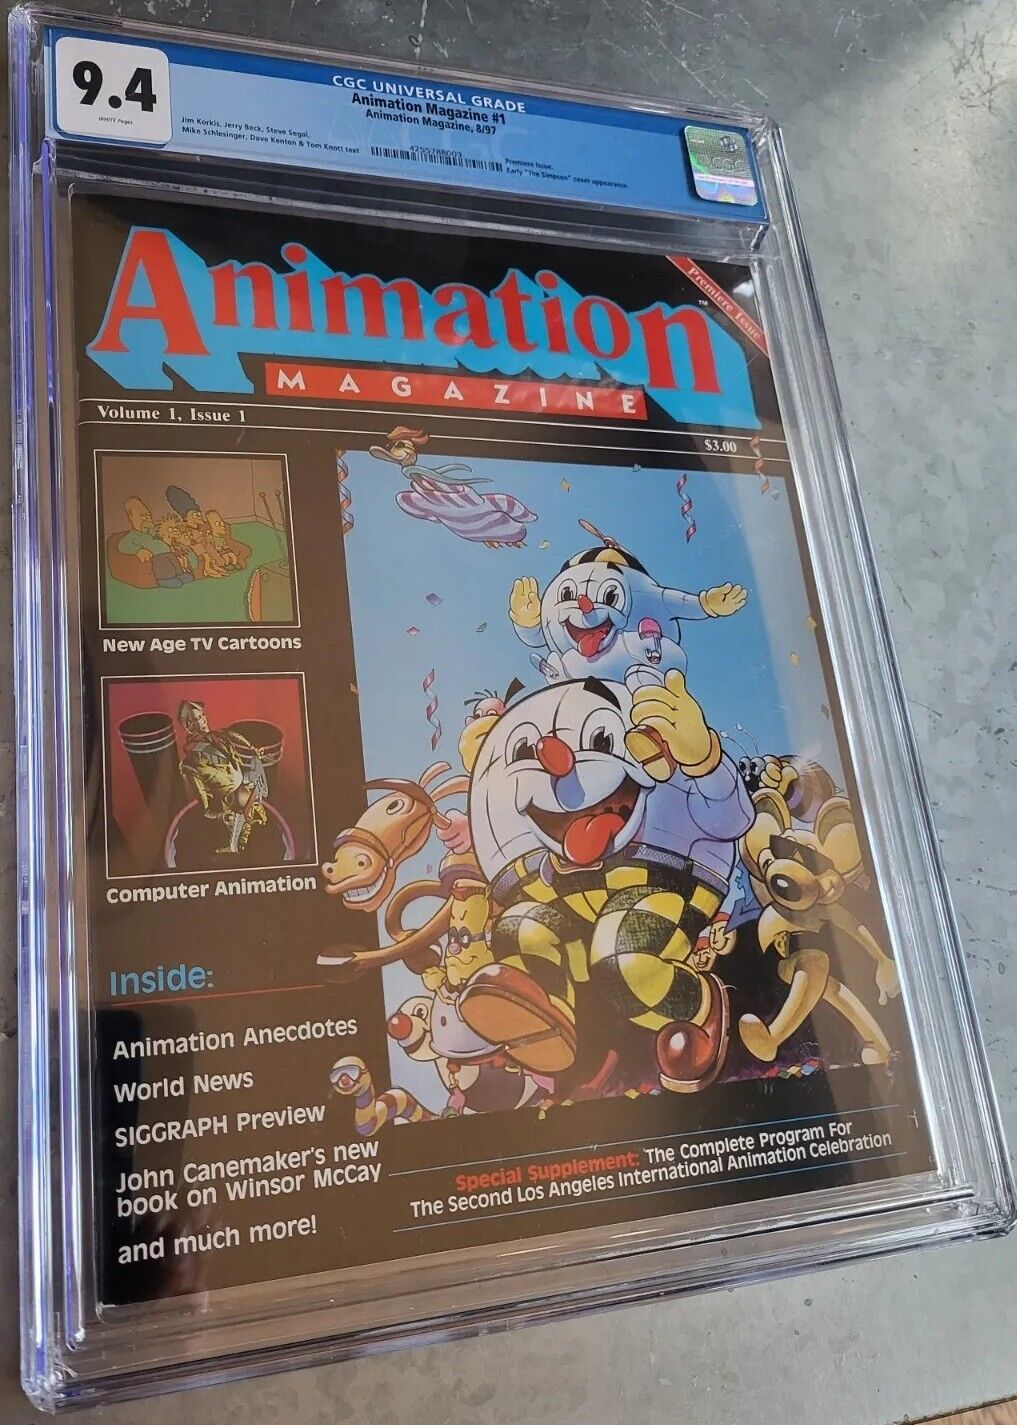 CGC 9.4 Animation MAGAZINE #1 1987 - 1st Appearance SIMPSONS-  Pop=1 None Higher